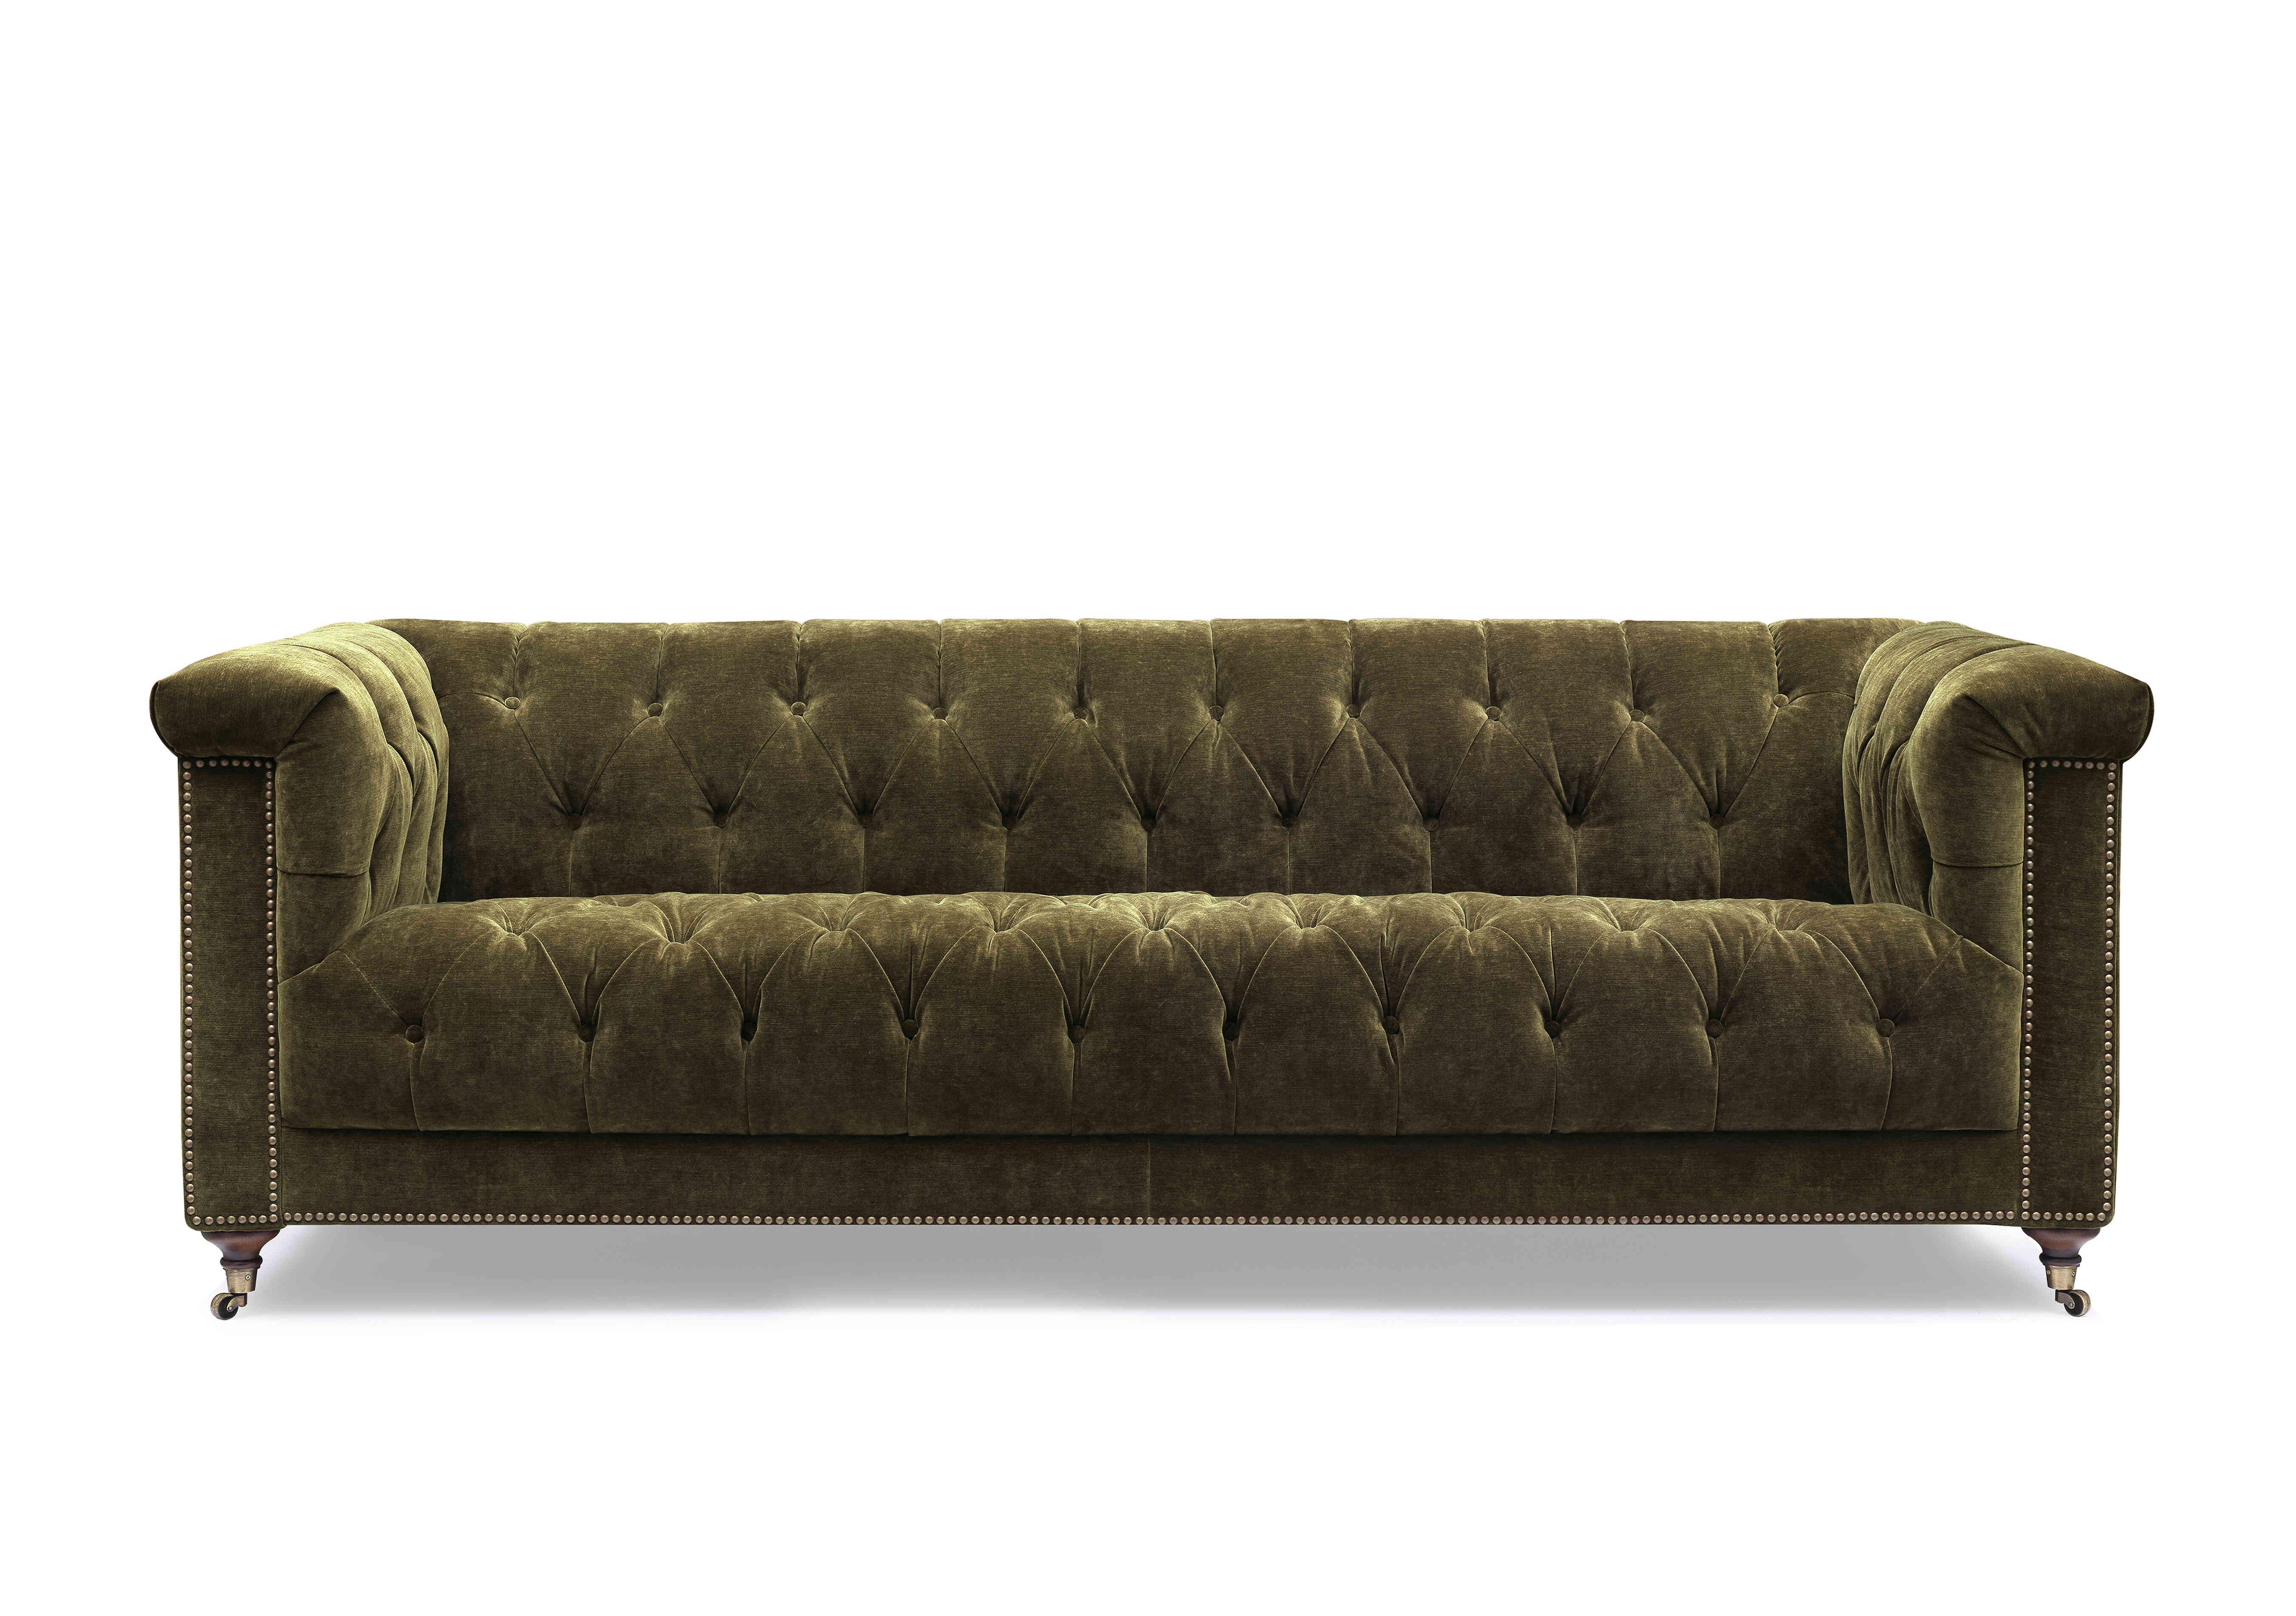 Wallace 4 Seater Fabric Chesterfield Sofa in X3y1-W018 Pine on Furniture Village